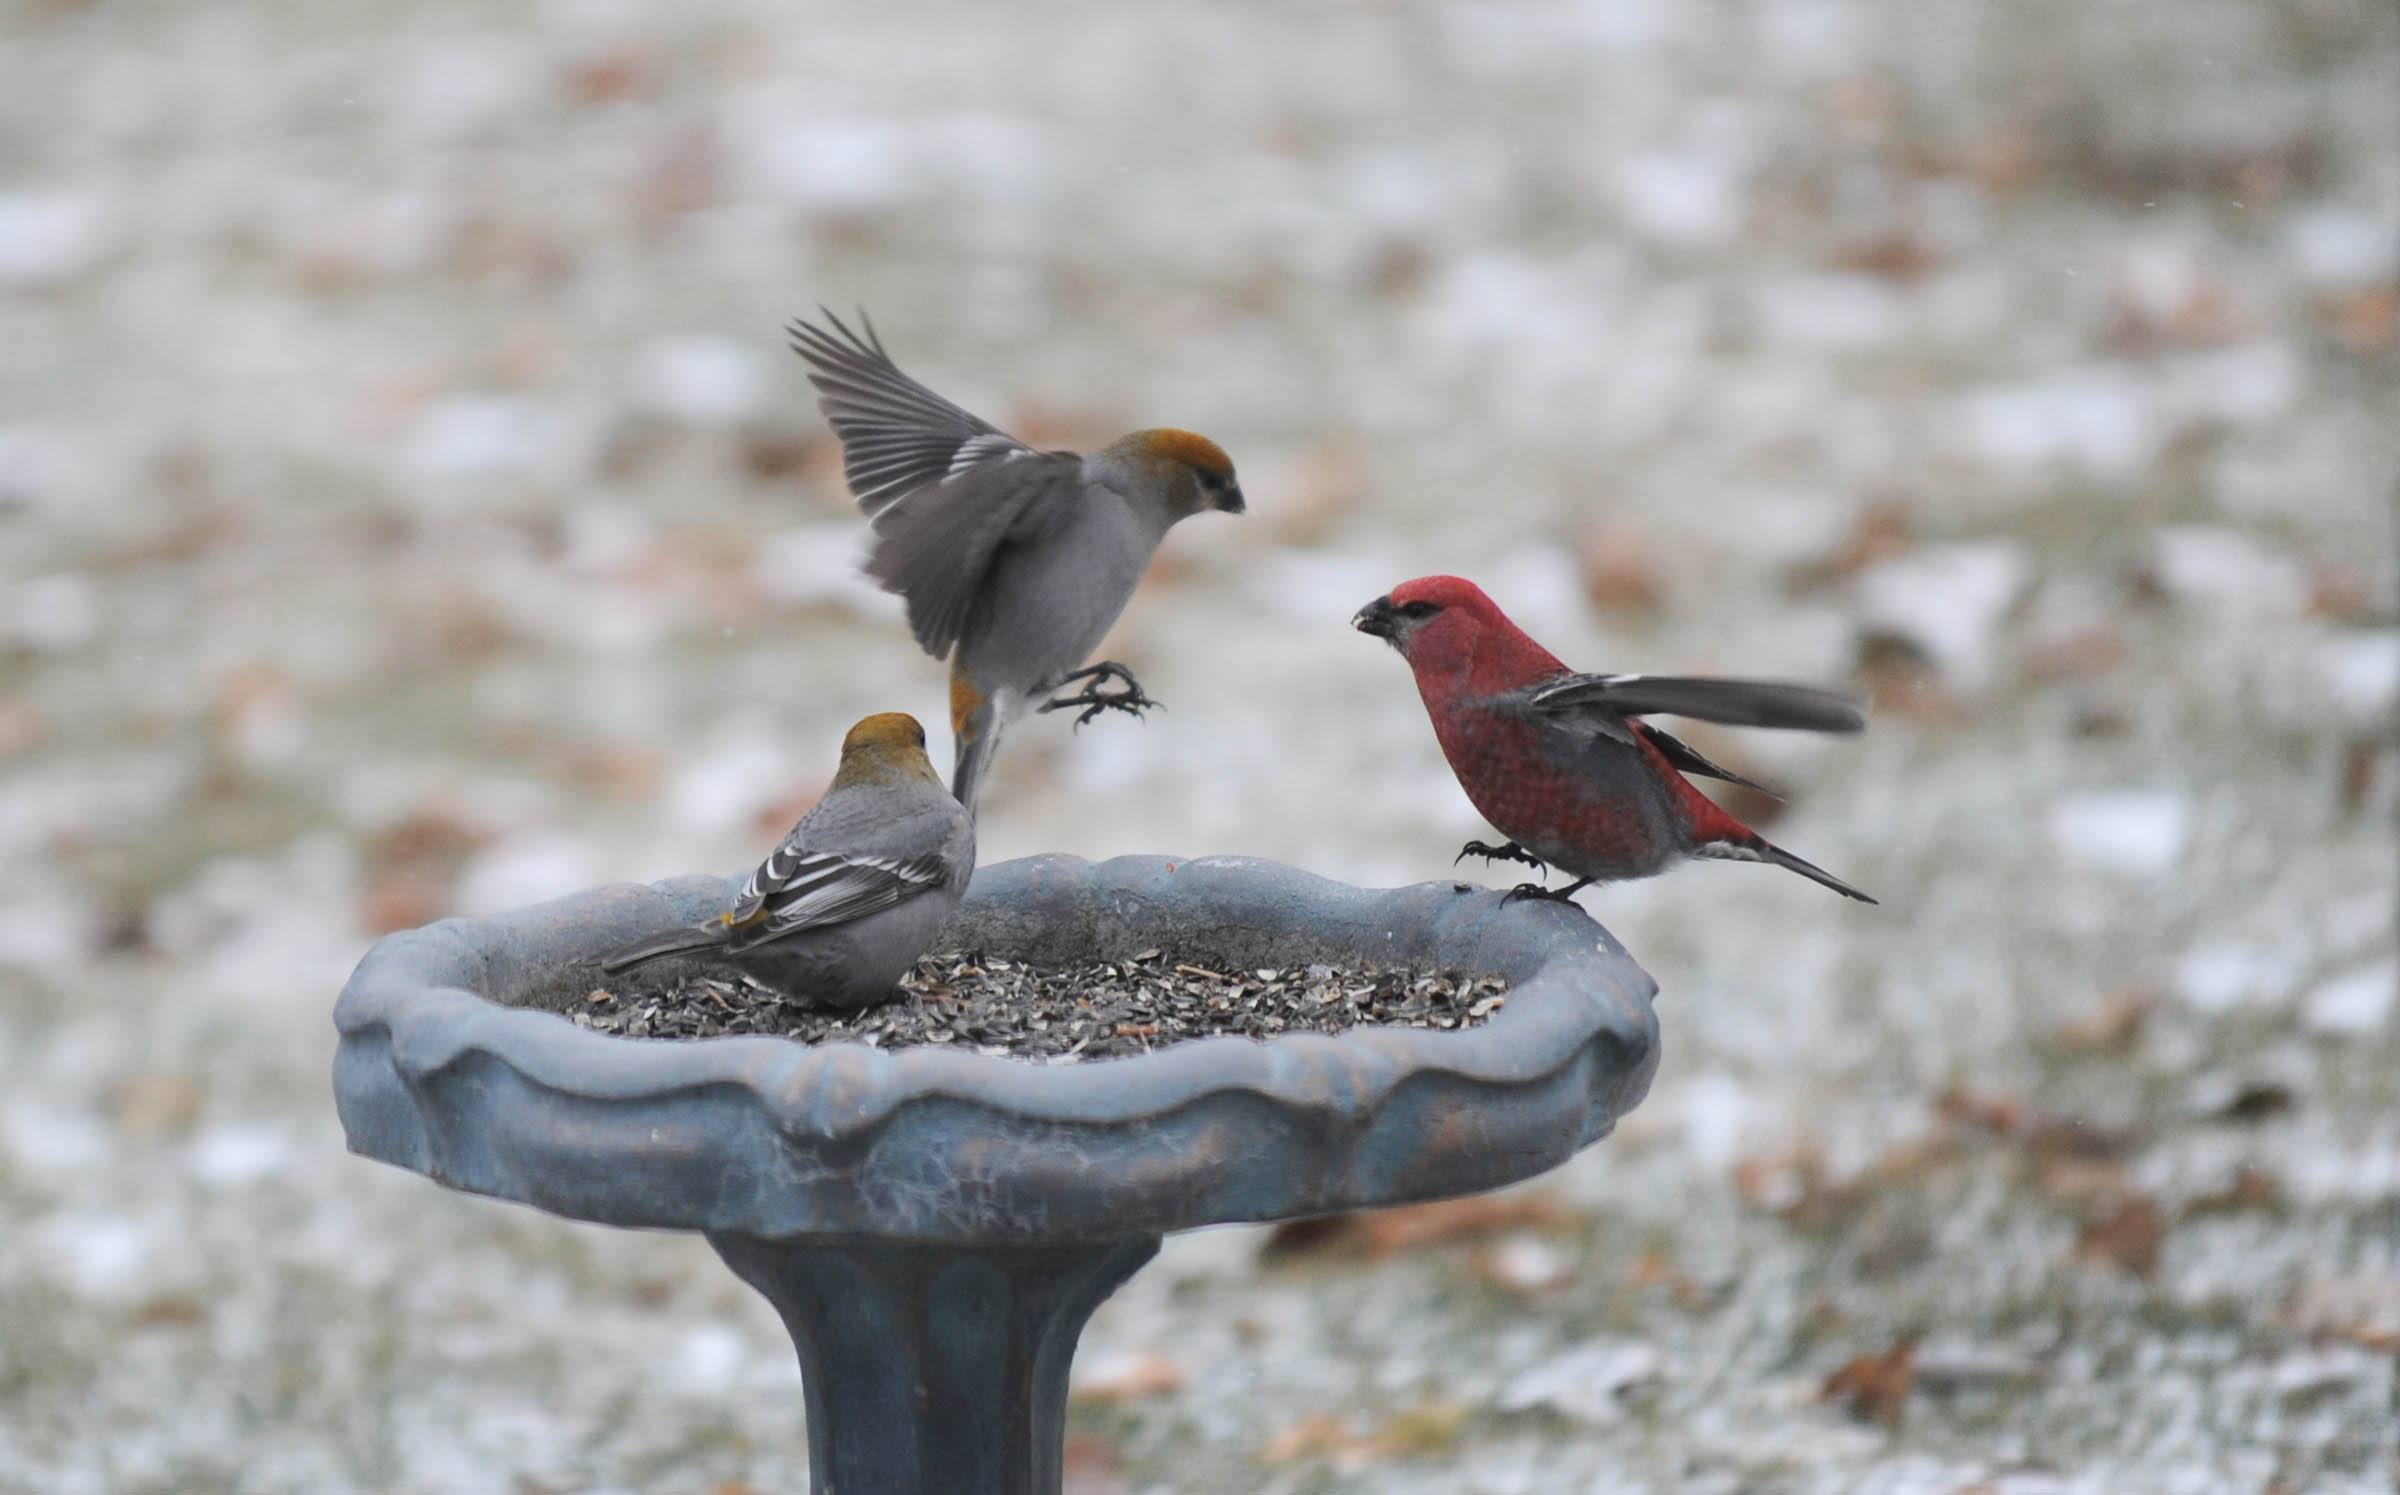 MUNCHING AWAY- Three Pine Grosbeak's brave the winter snow to feast at a feeder recently in the Red Deer County area.